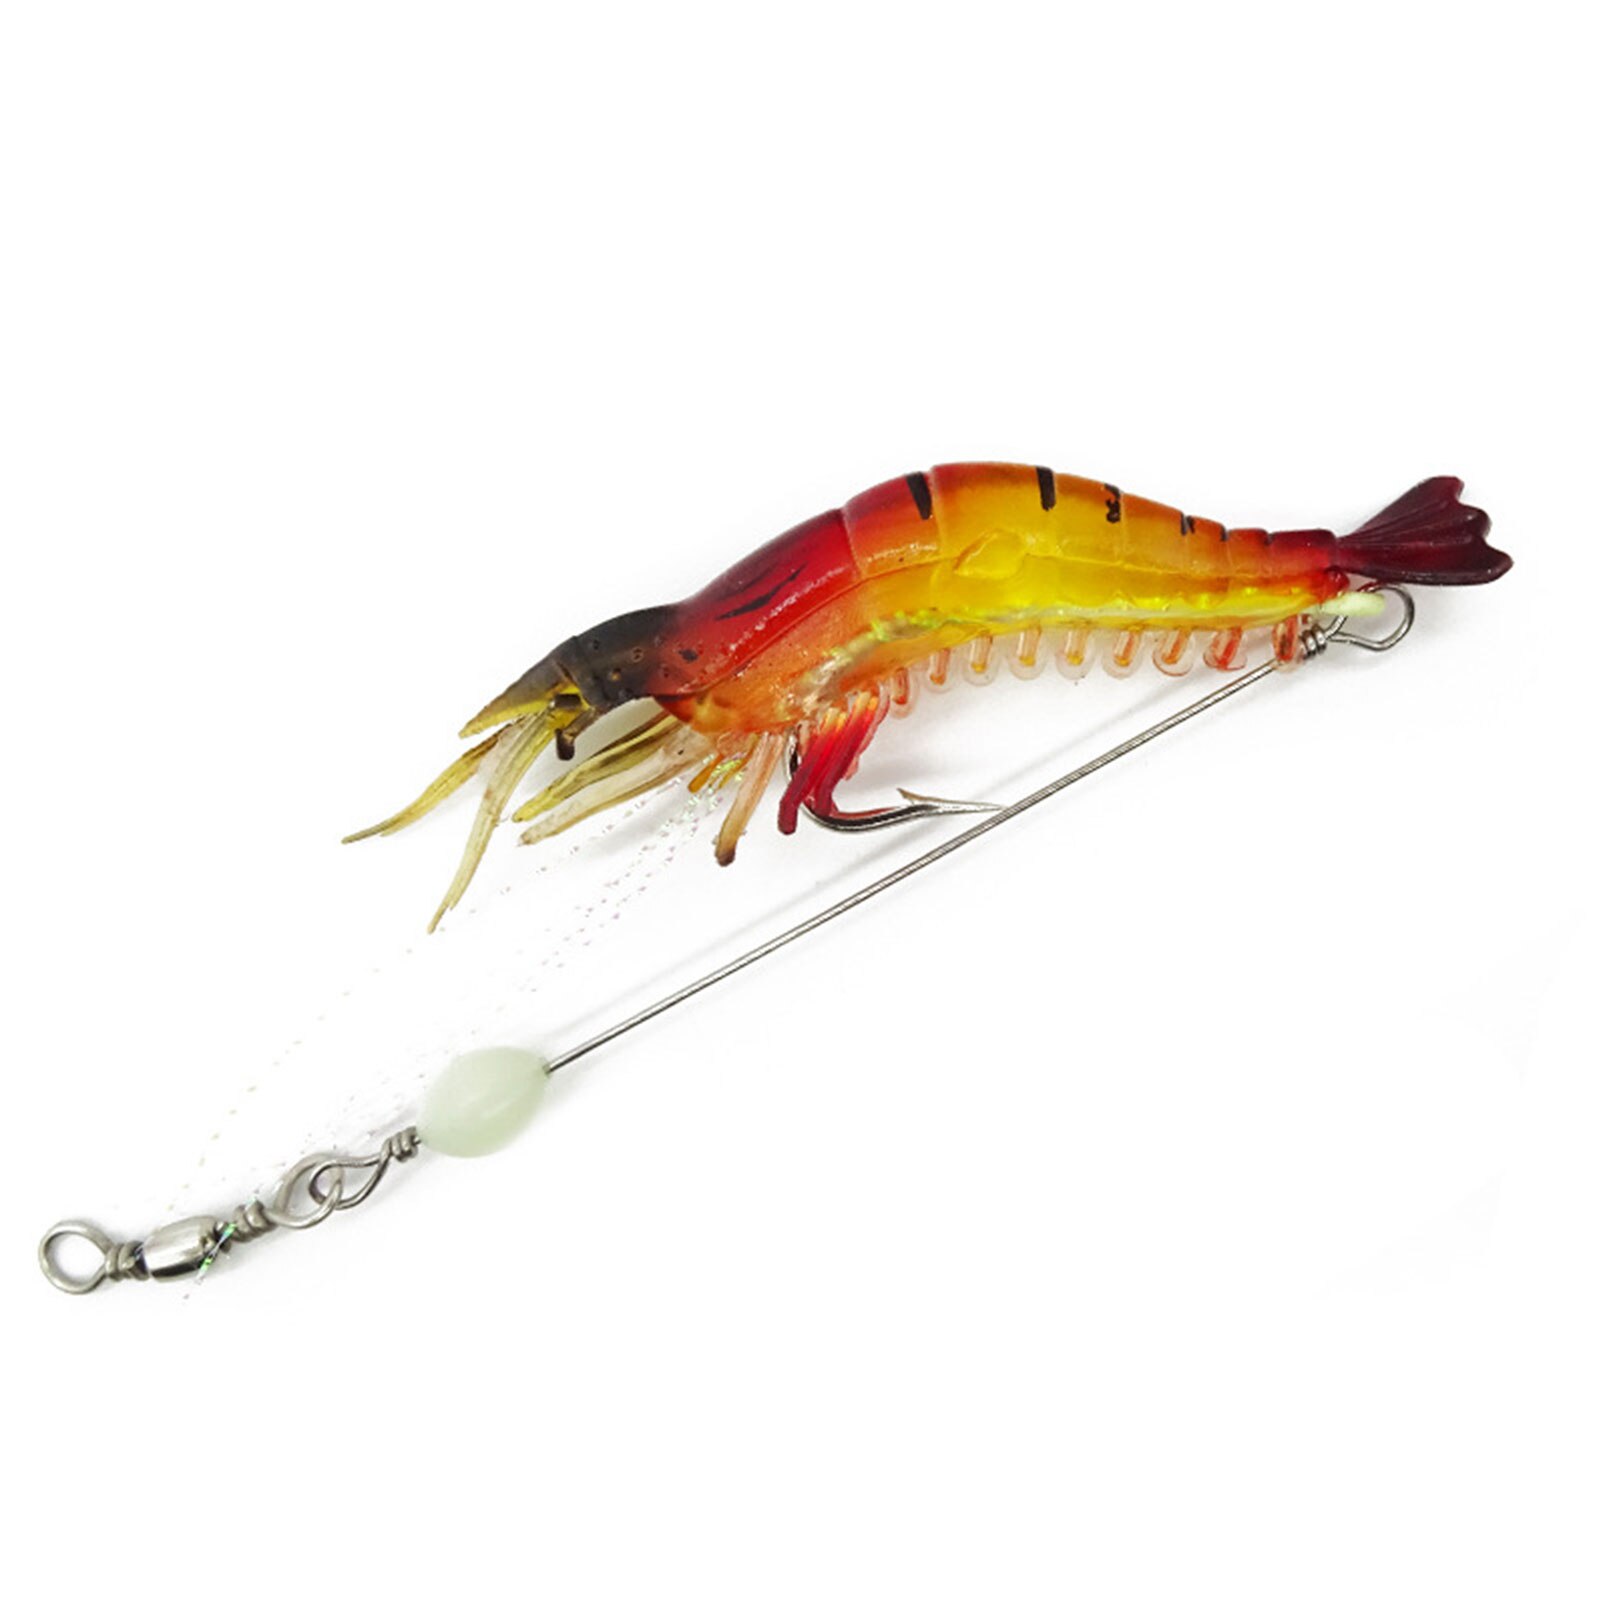 ETOP】Fishing Lures Artificial Bait Swimbaits Realistic Appearance